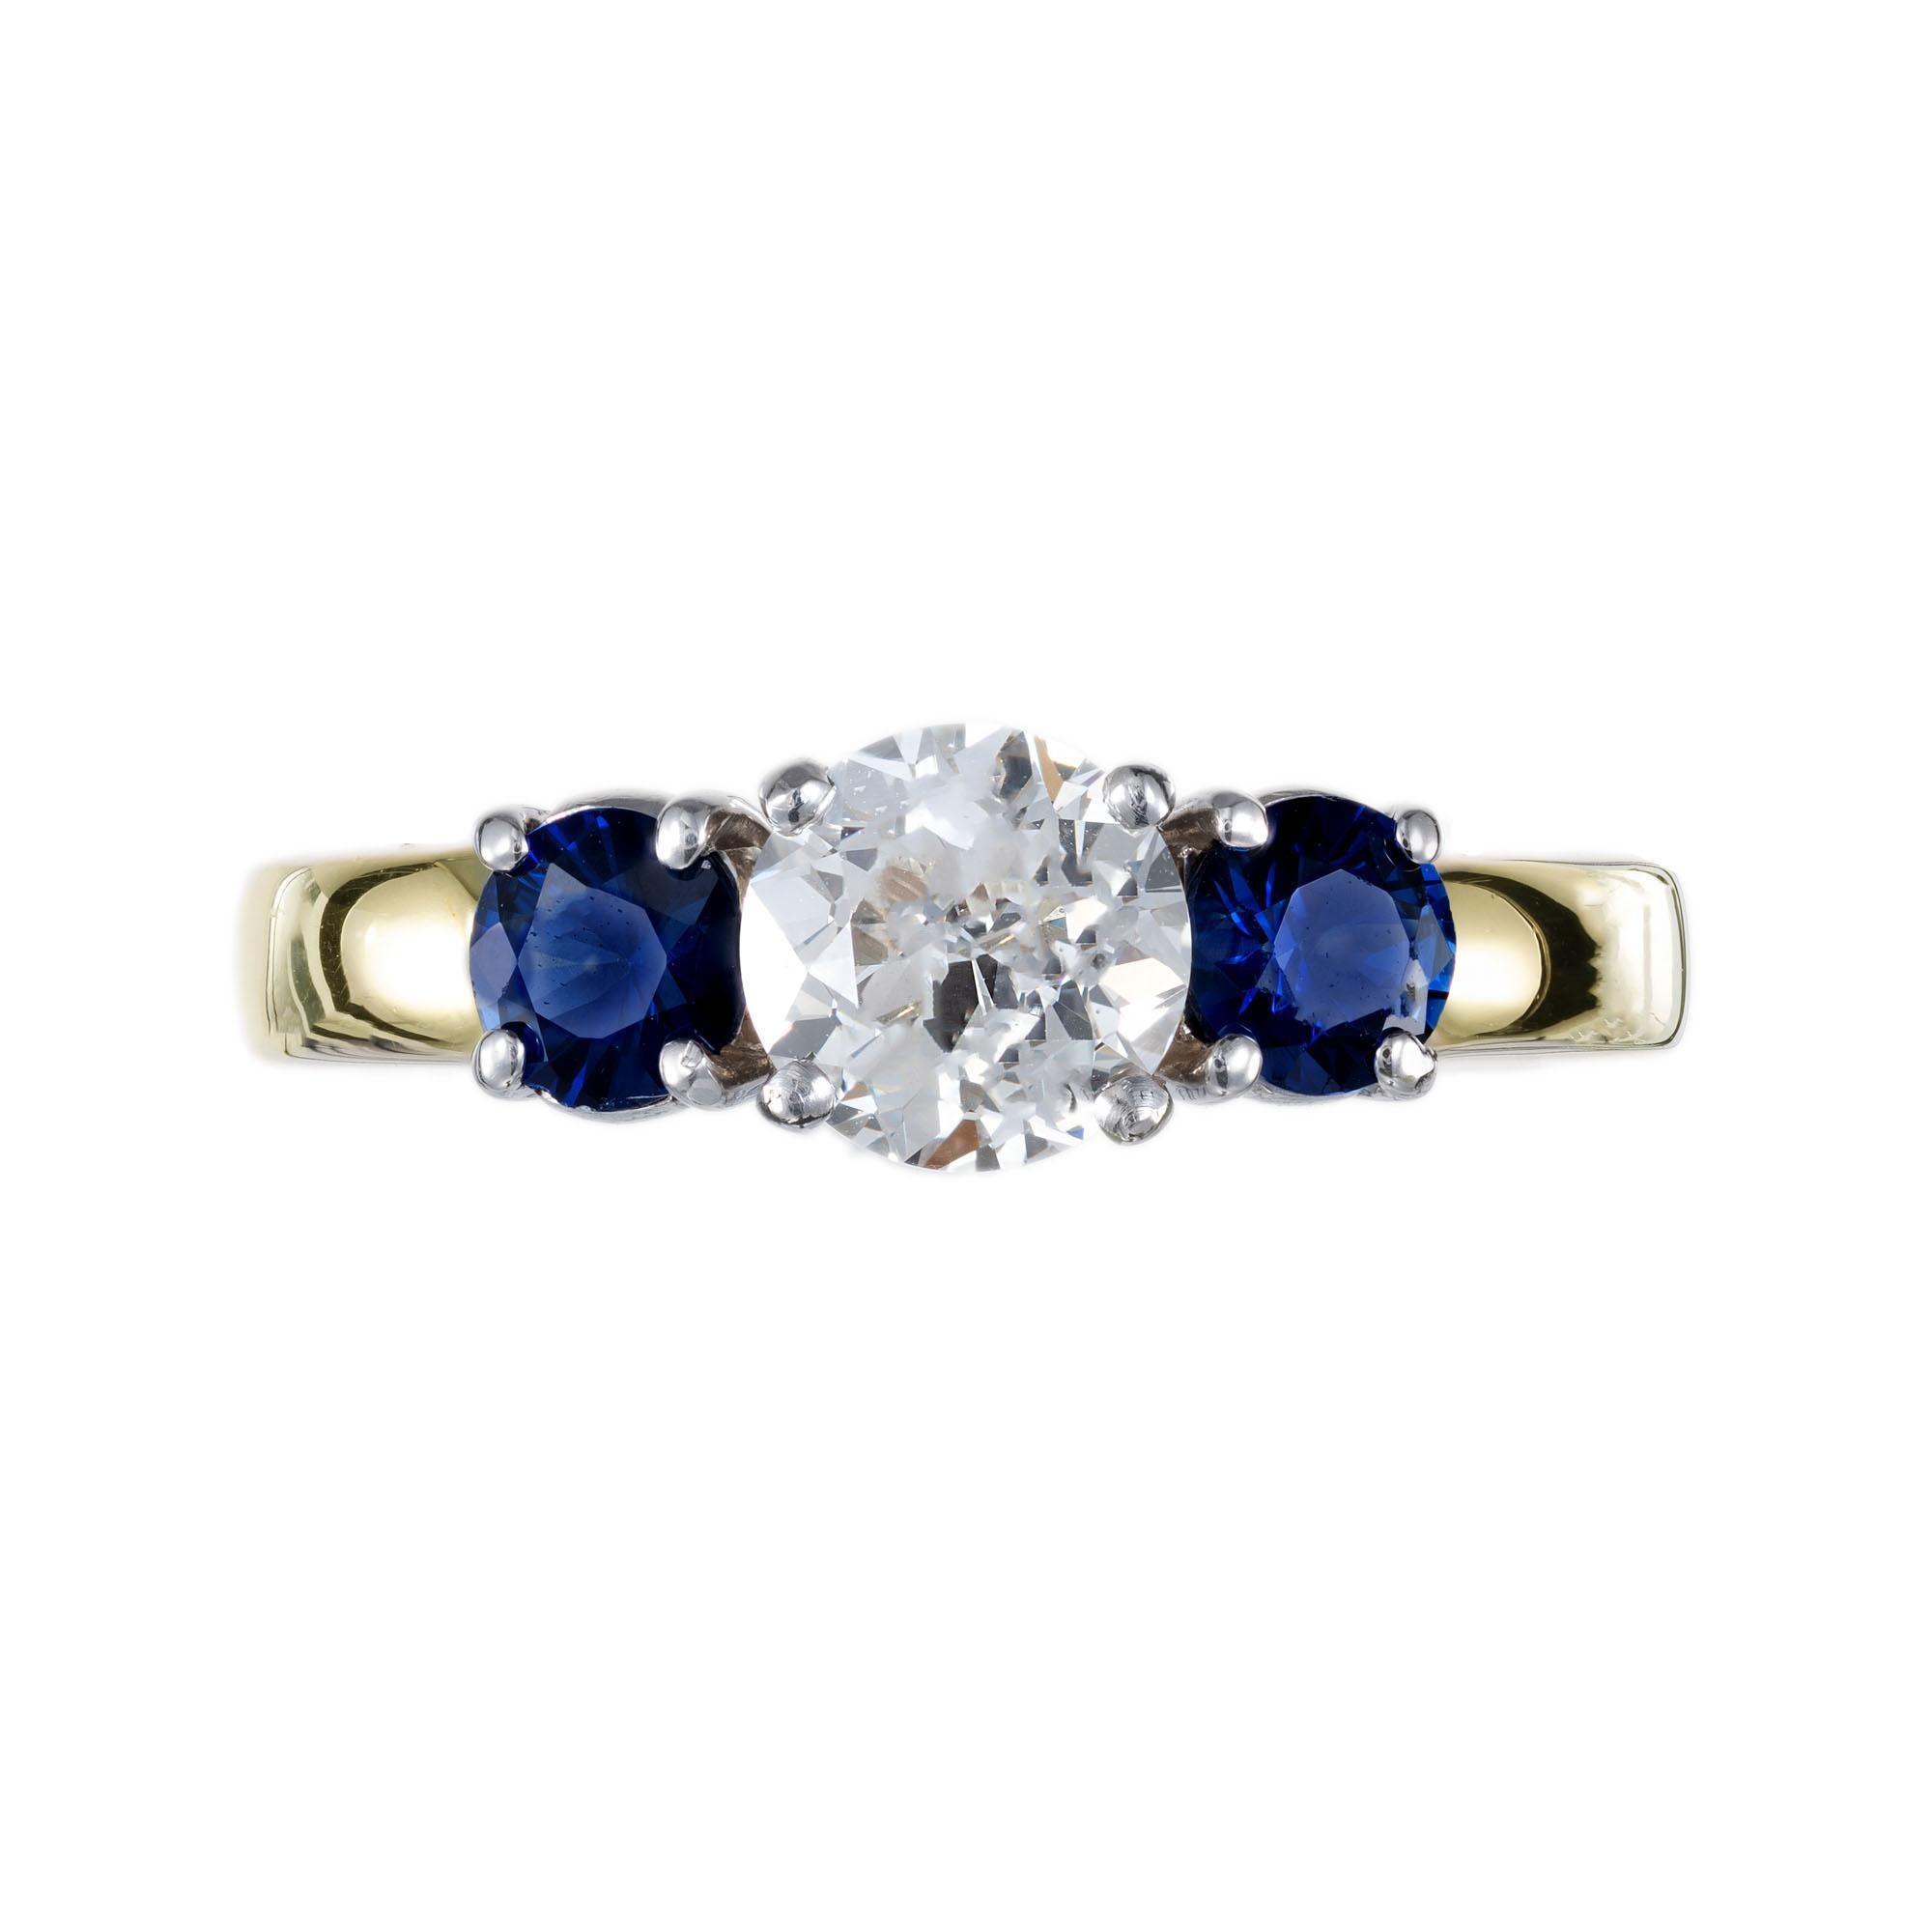 Diamond and sapphire engagement ring. EGL certified old European center diamond with two GIA certified side round sapphires, set in a 18k yellow gold setting with a platinum triple crown. The ring was created in the Peter Suchy workshop.

1 Old